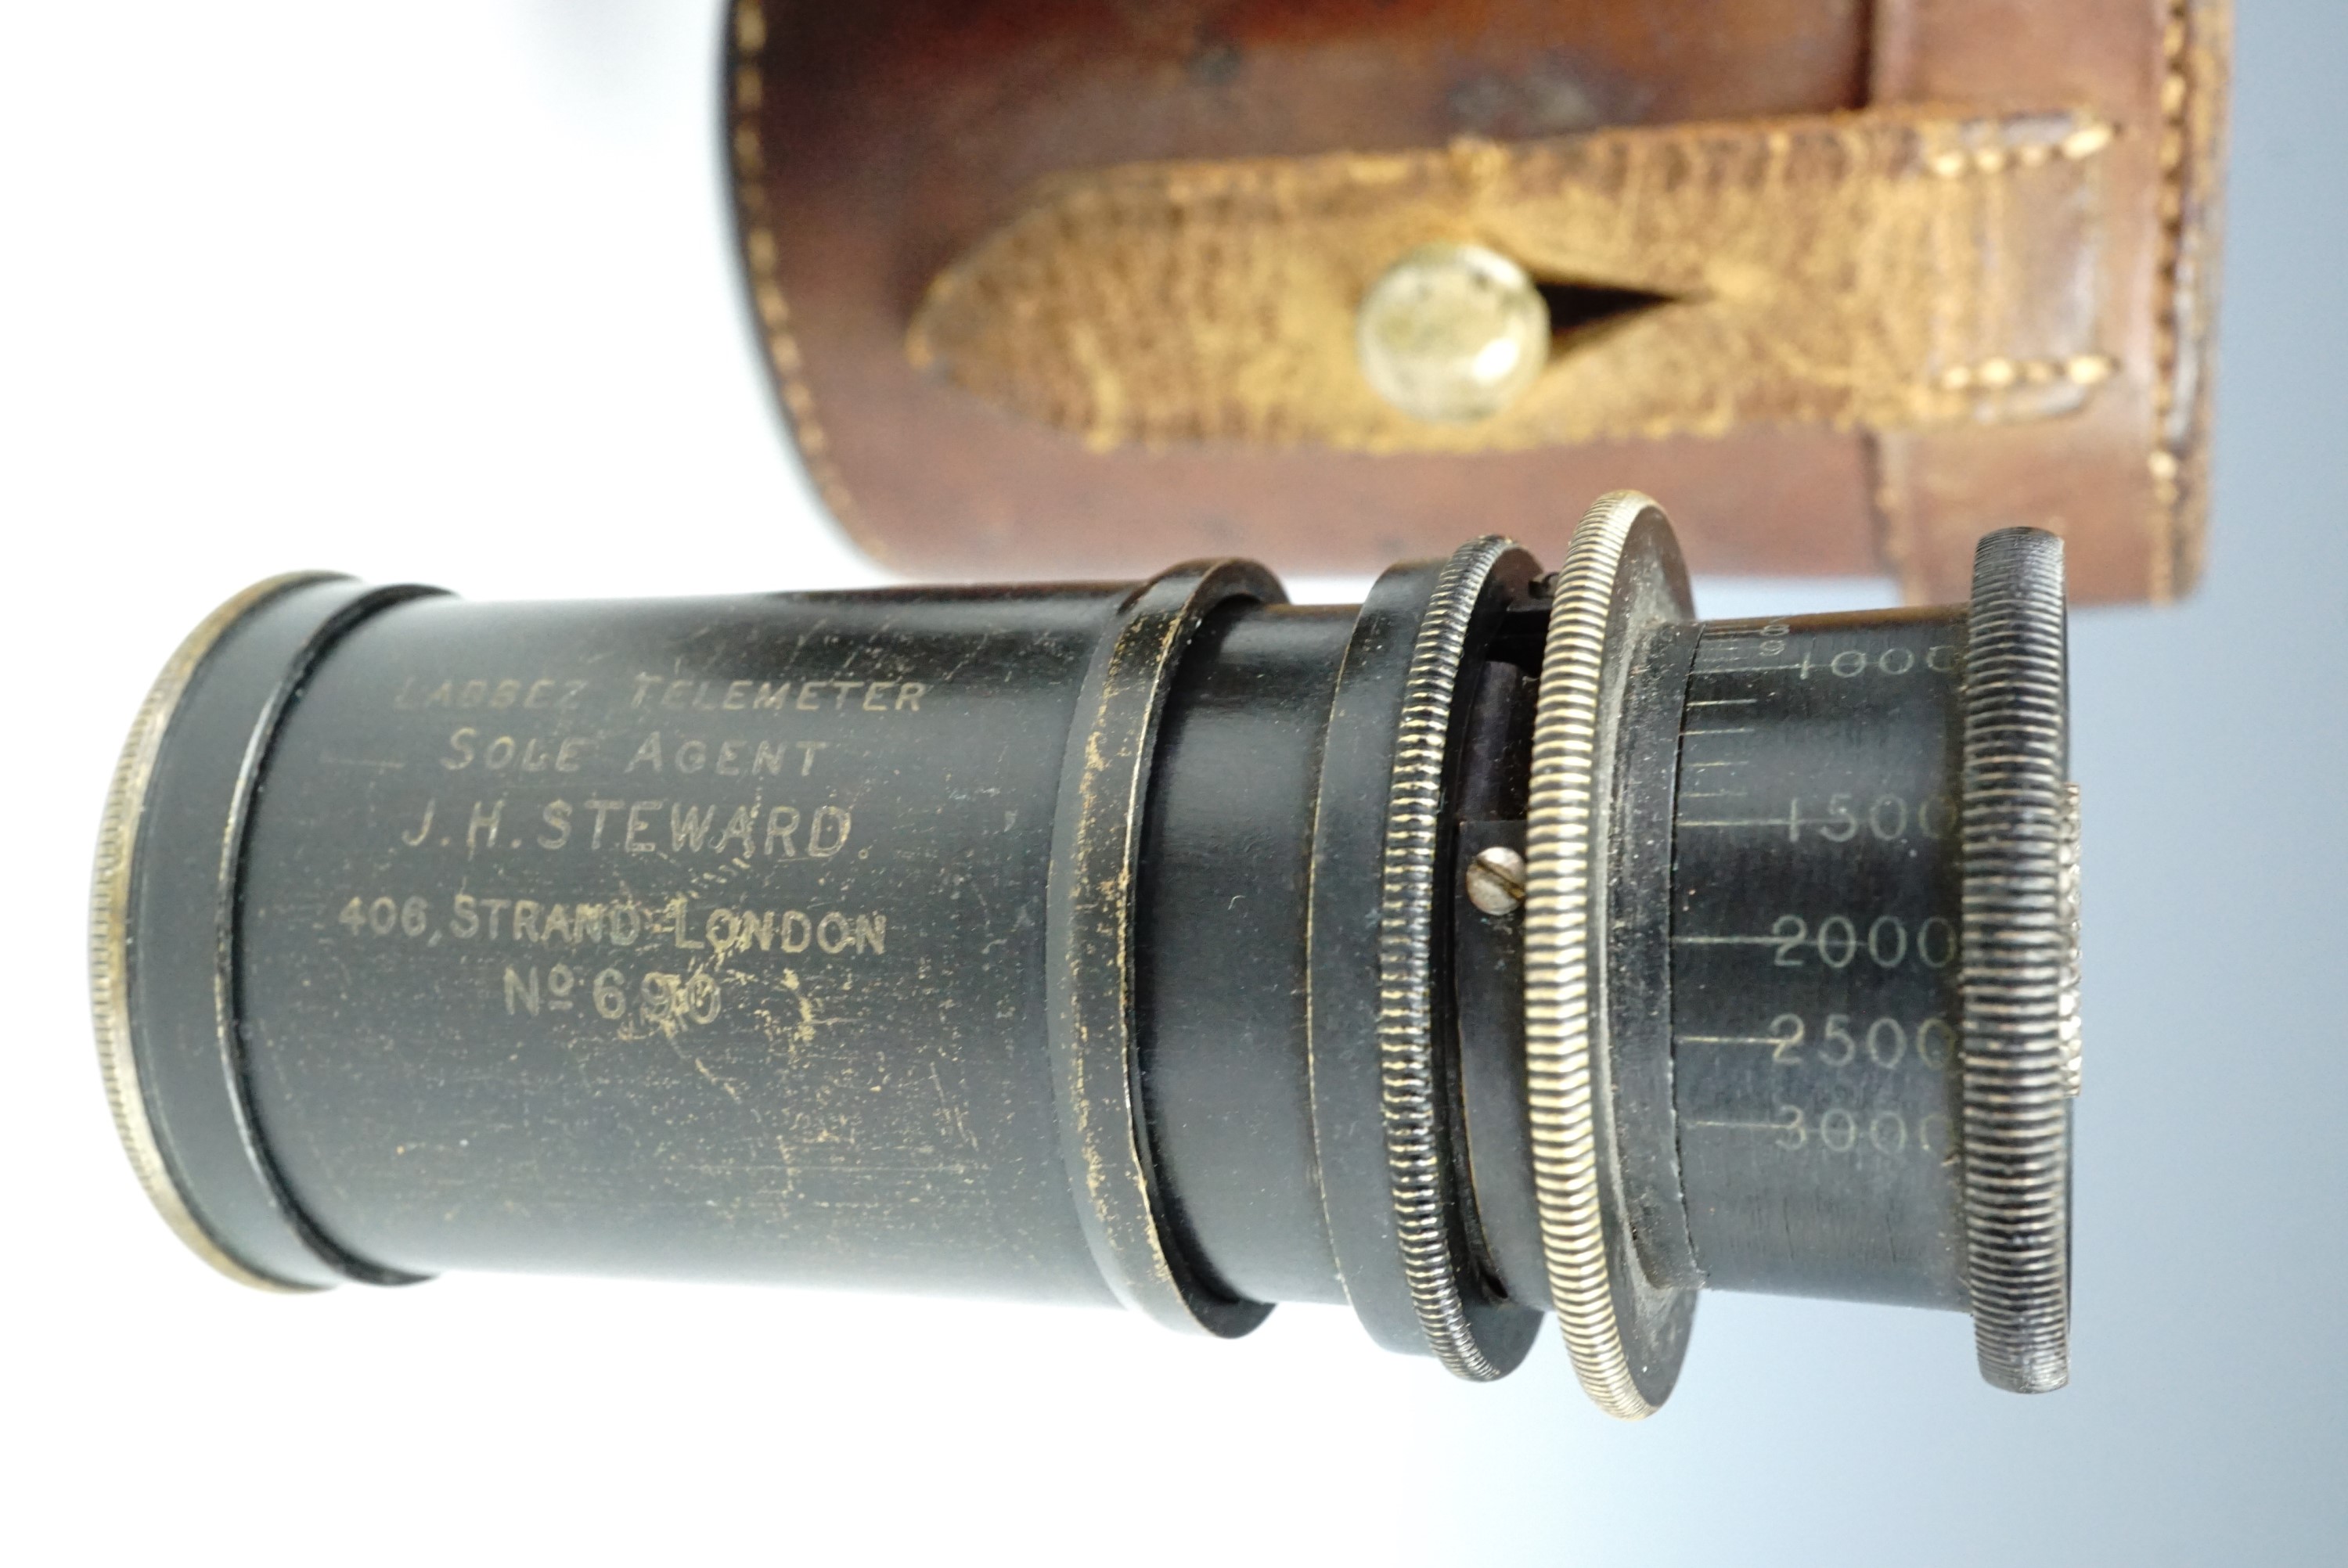 A late 19th / early 20th Century Labbez Telemeter pocket rangefinder, case 8.5 cm long - Image 2 of 2